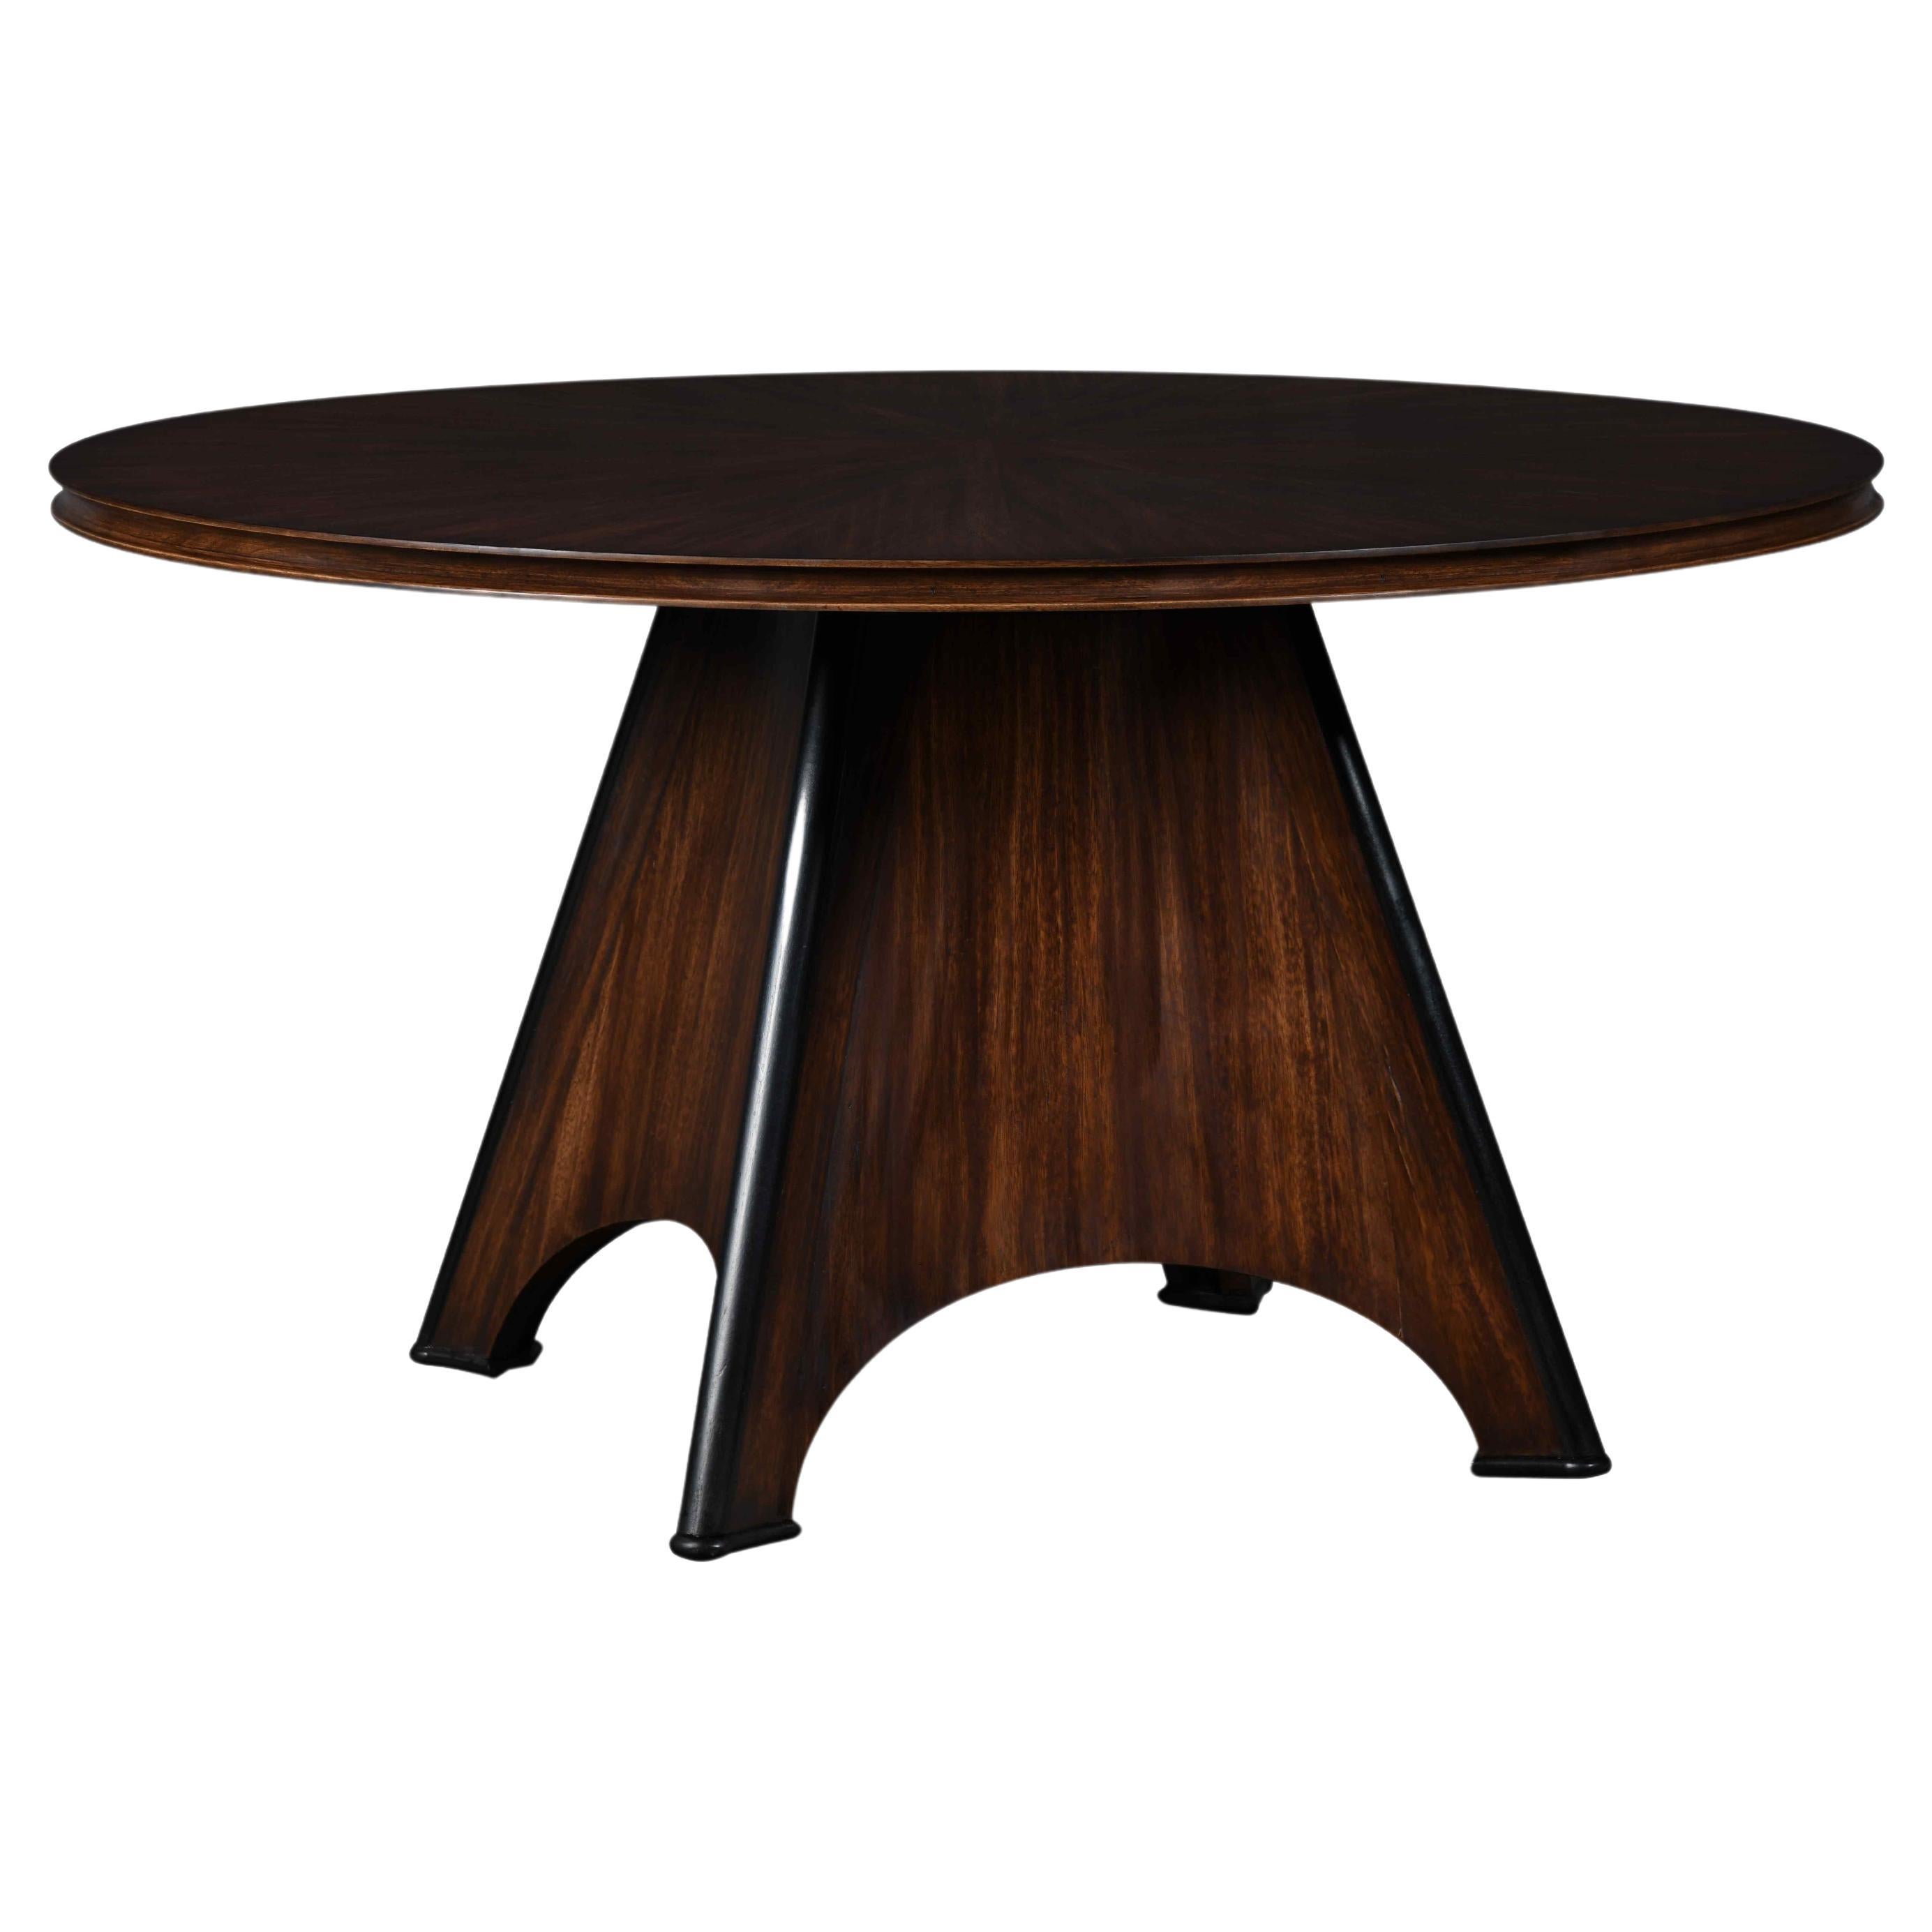 Muret Center Table with a Pyramid-Like Base and Its Curved and Concave Sides